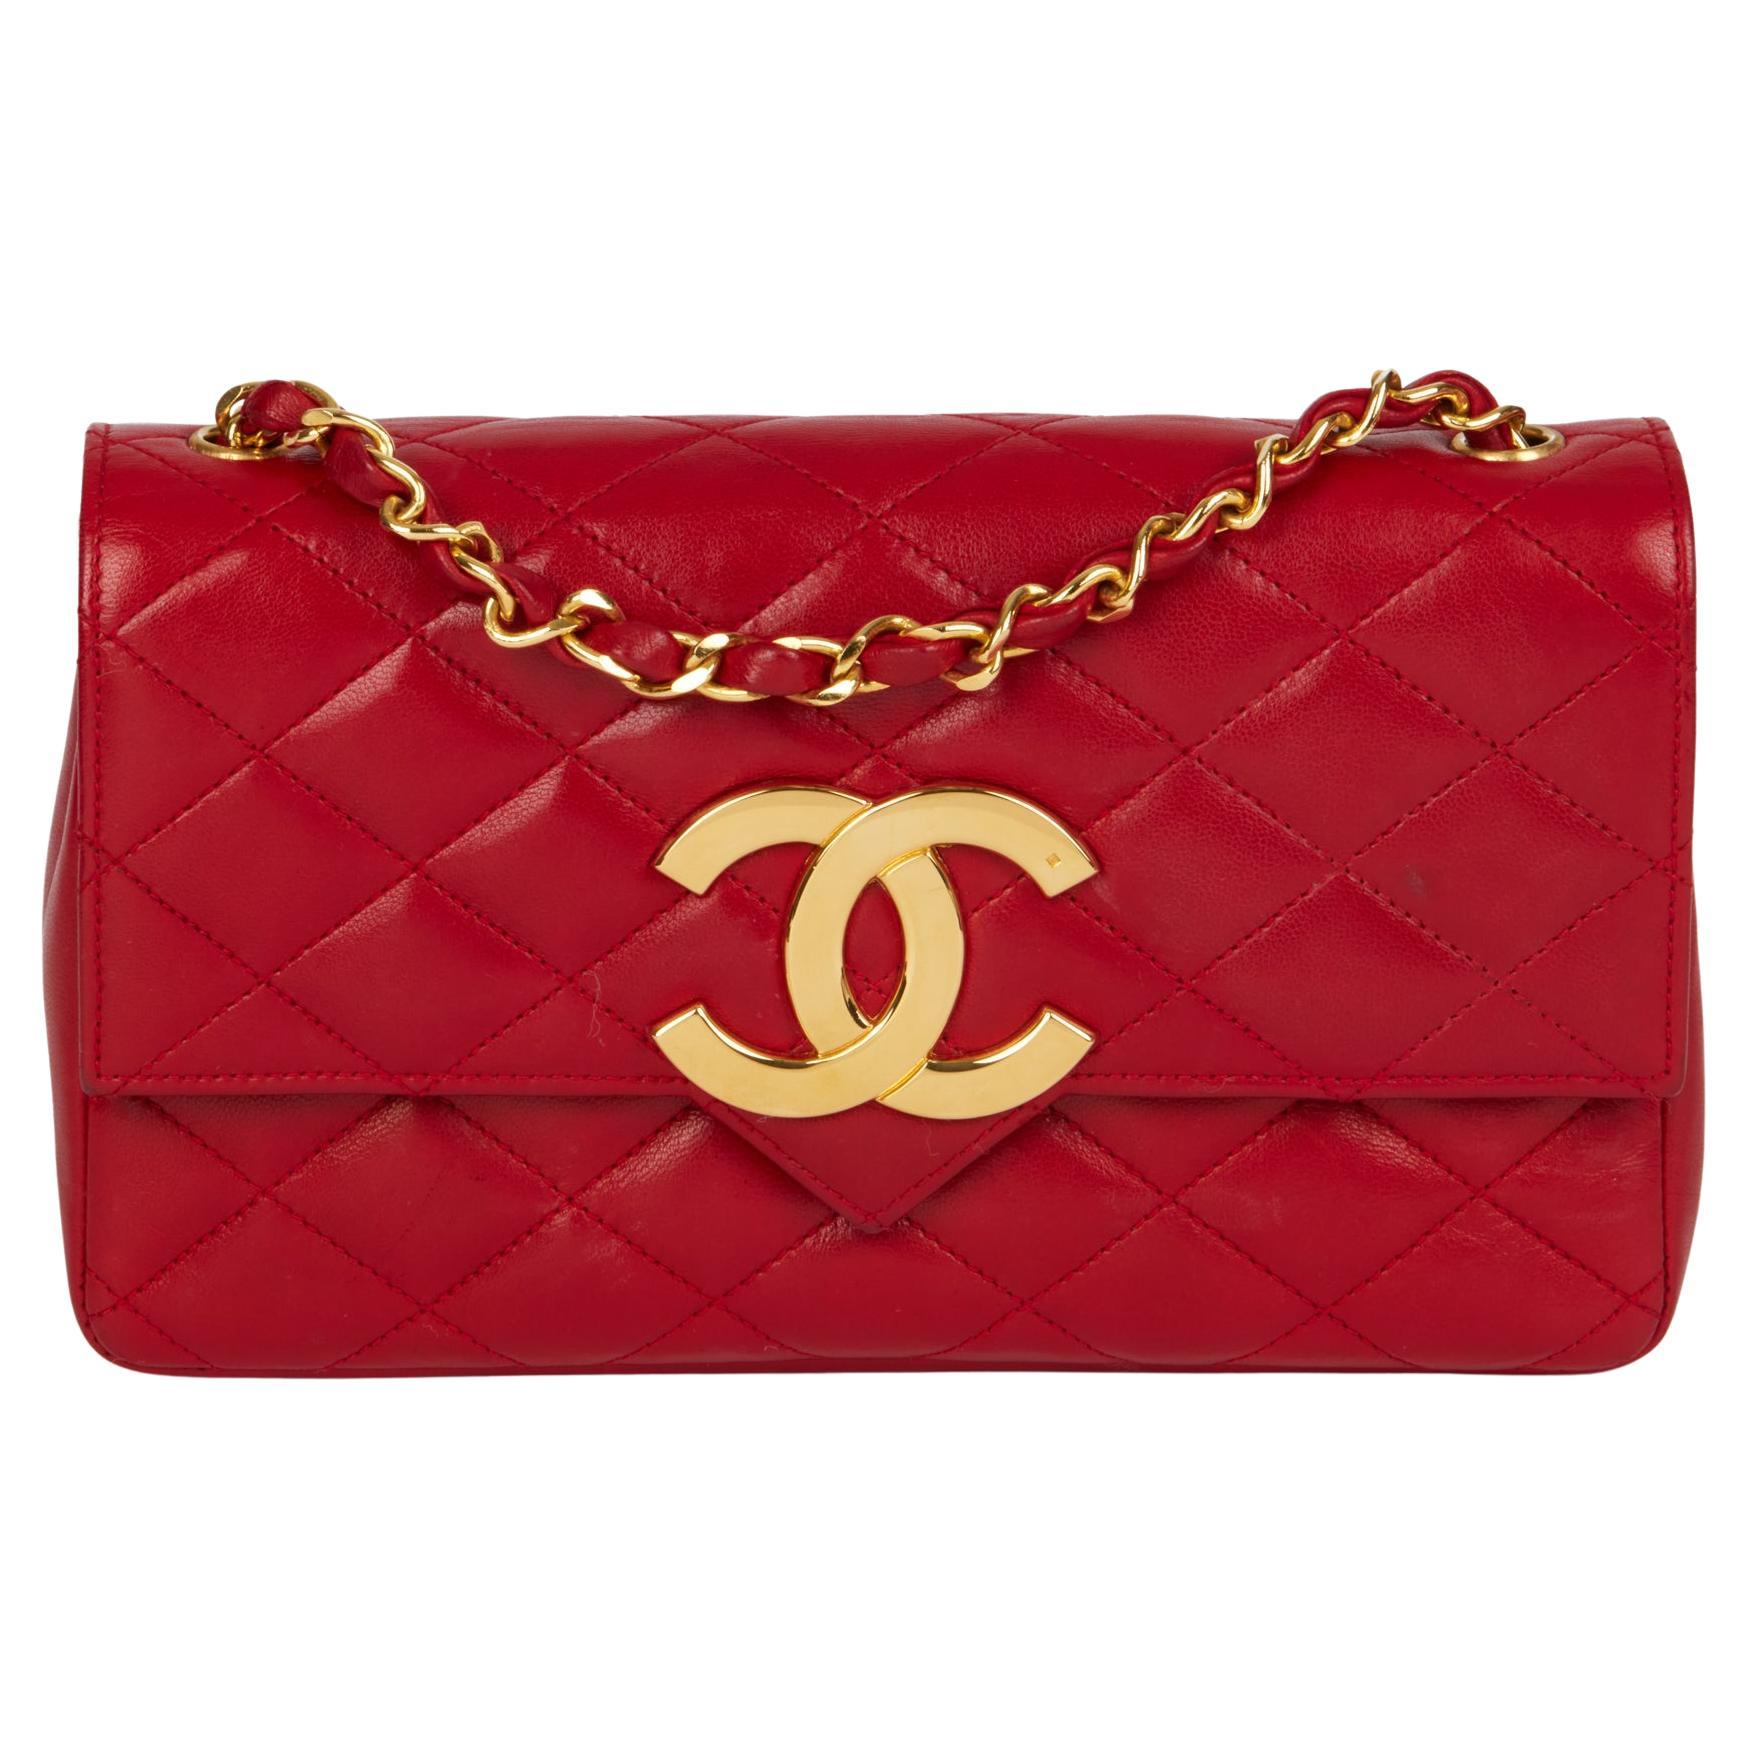 New Chanel Square Flap Beige Quilted Leather Red Patent Chain Shoulder Bag